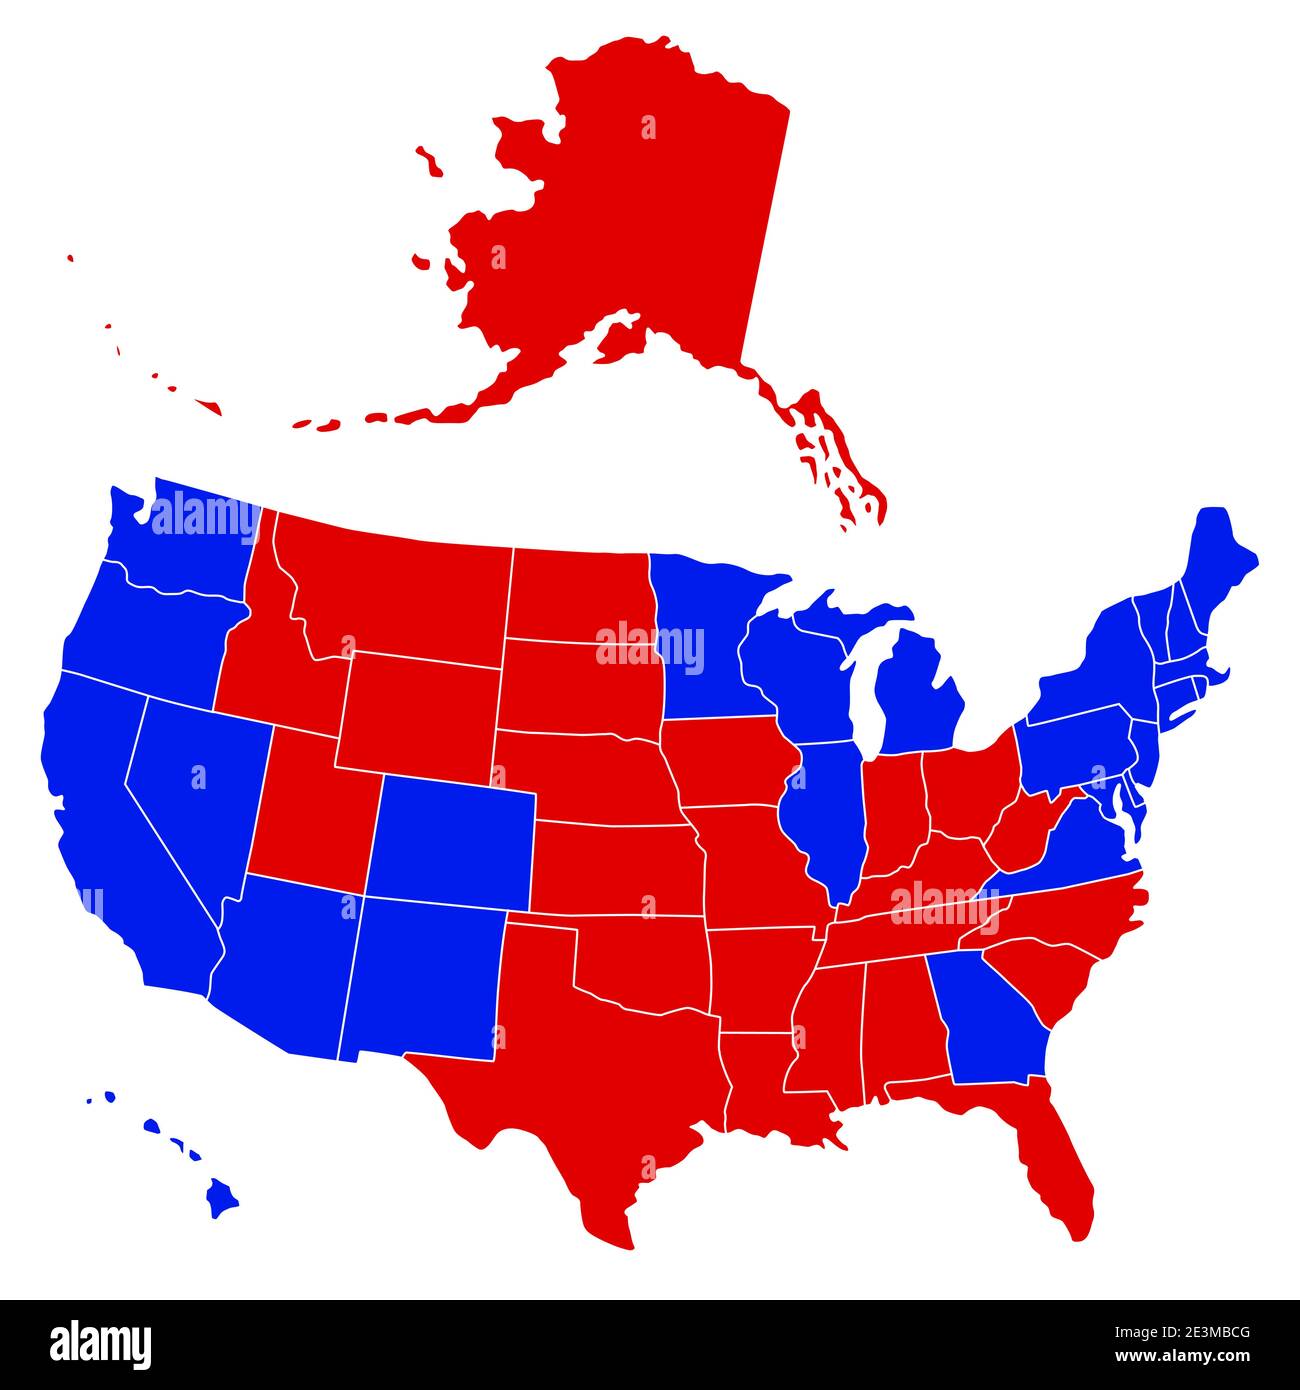 Presidential election 2020 final results on map of USA.  Source of map: http://www.lib.utexas.edu/maps/united states/n.america.jpg Stock Vector